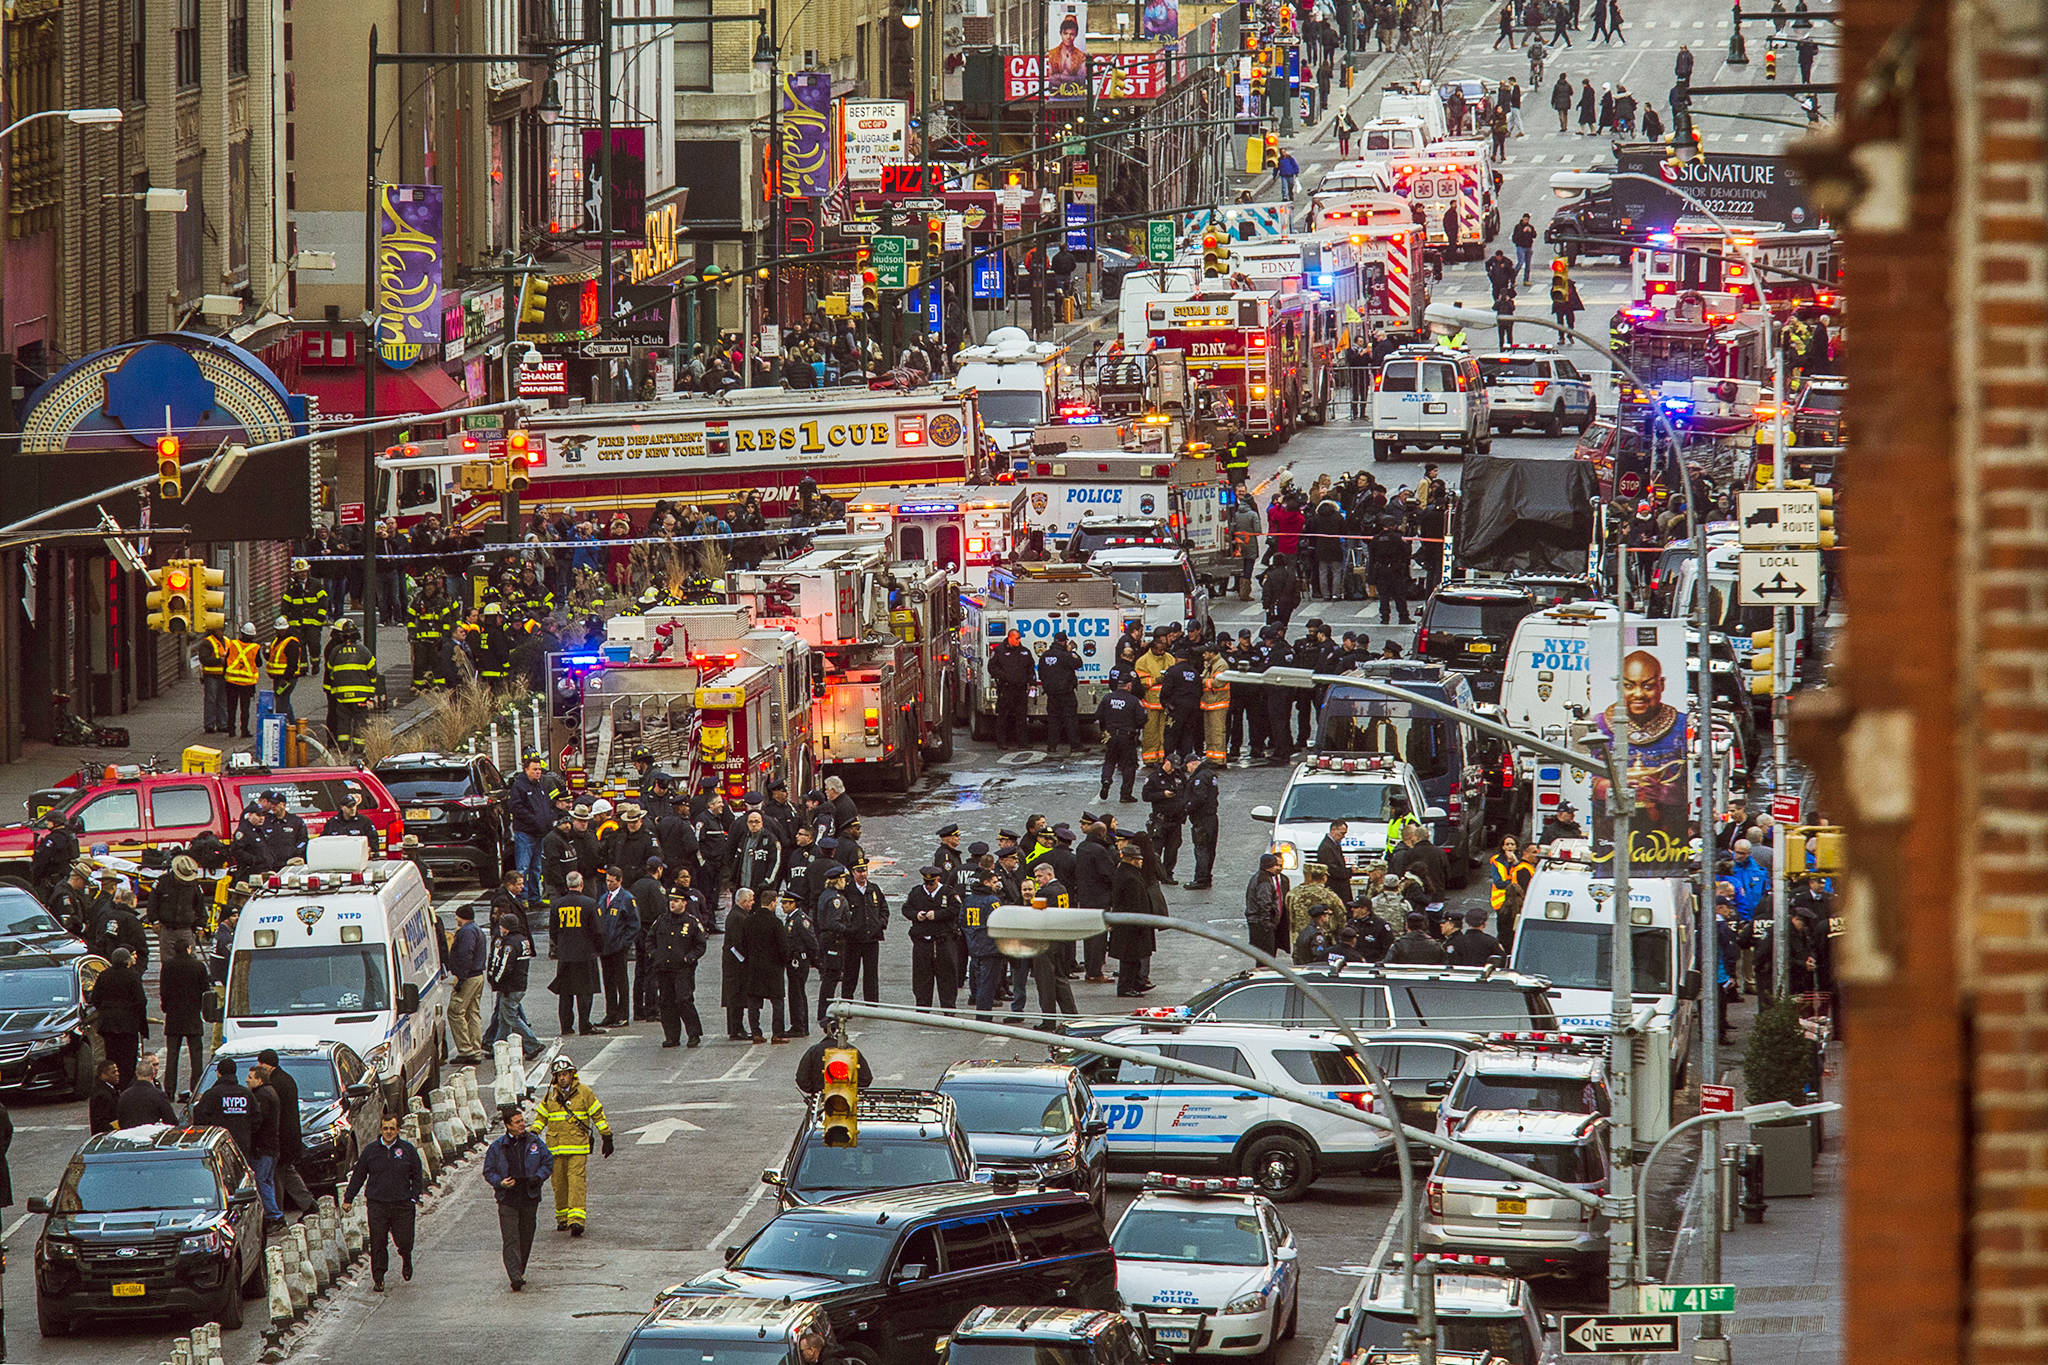 Law enforcement officials work following an explosion near New York’s Times Square on Monday. (AP Photo/Andres Kudacki)